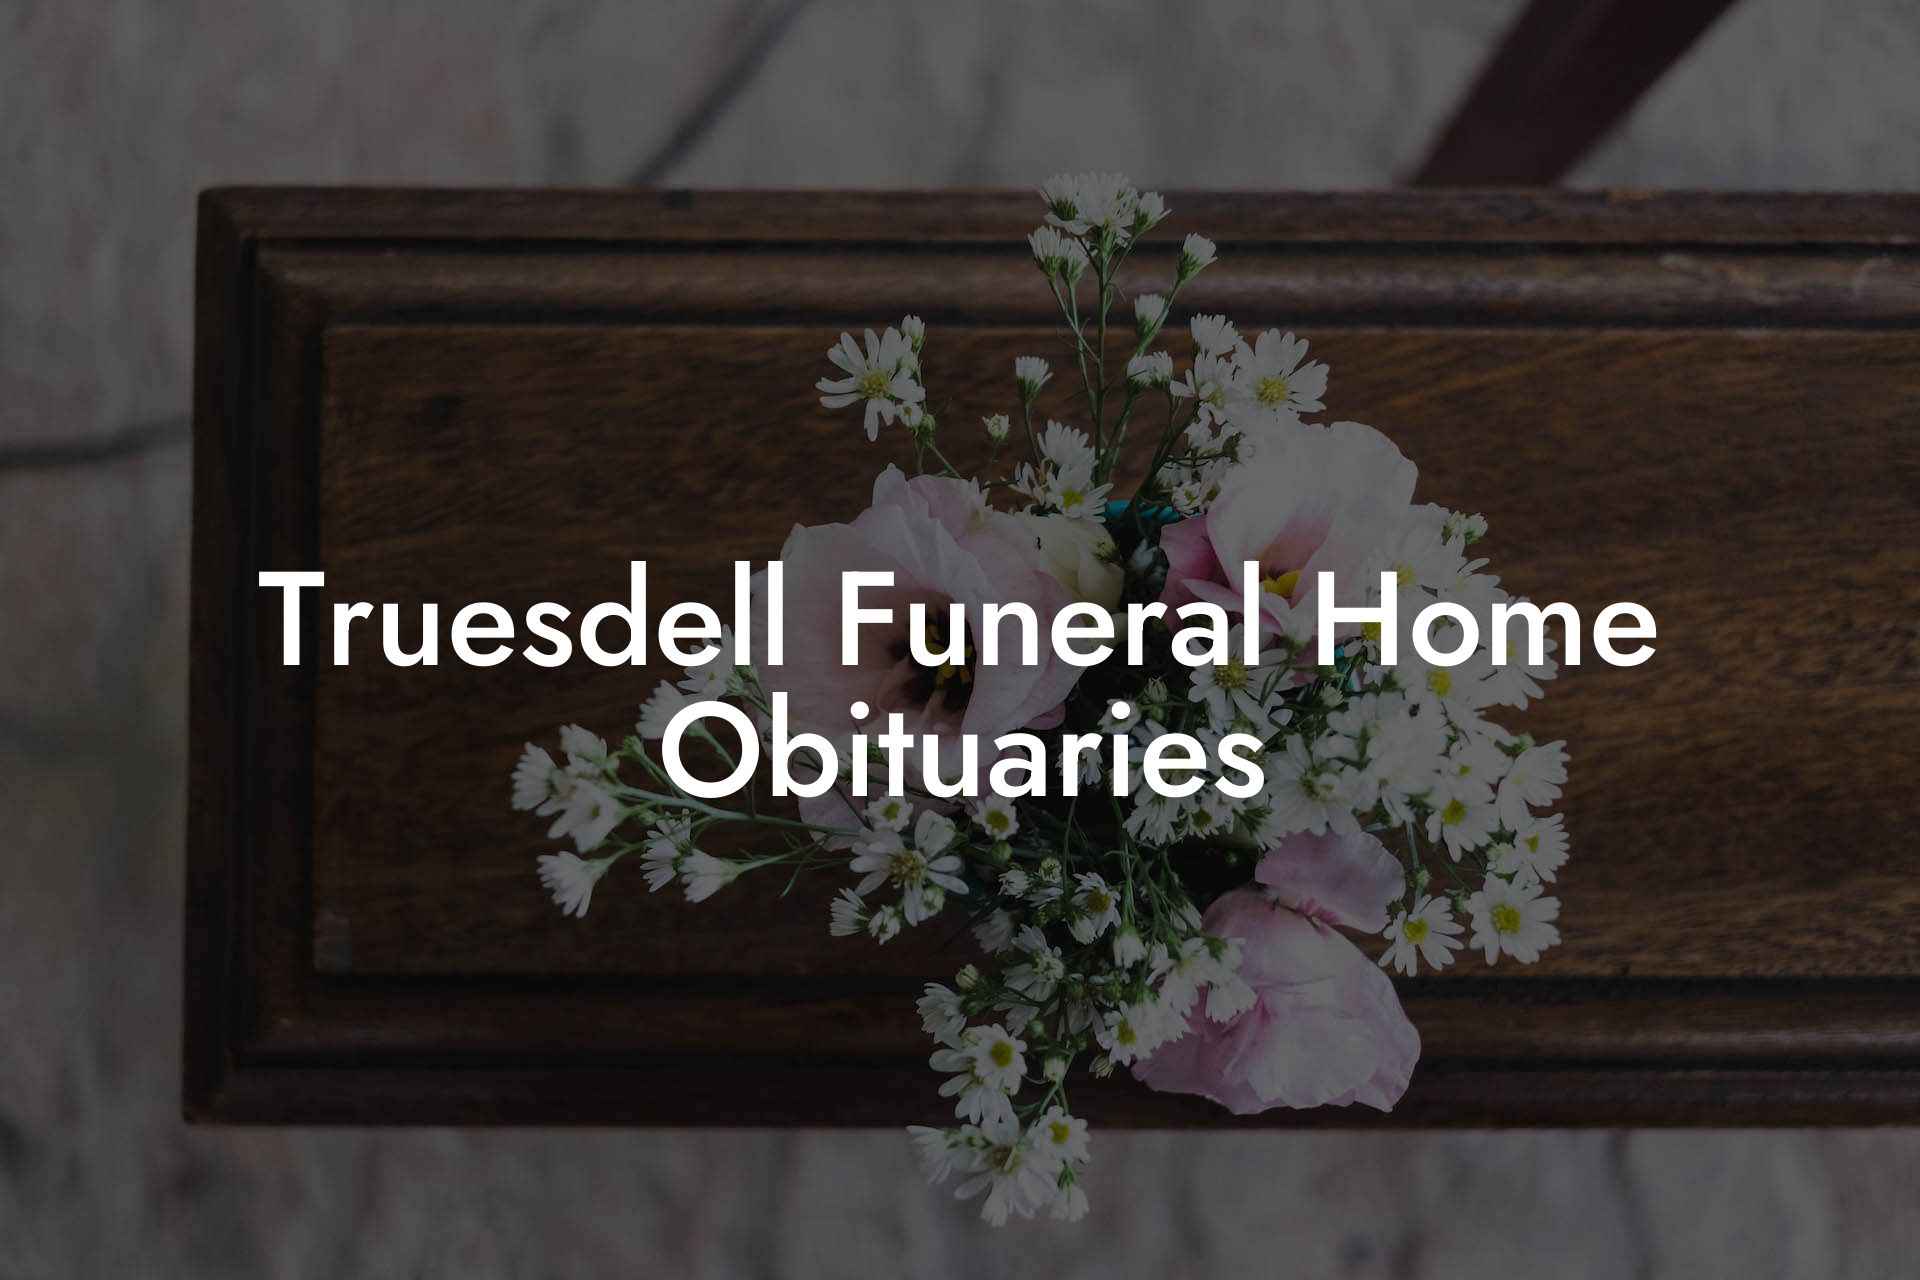 Truesdell Funeral Home Obituaries